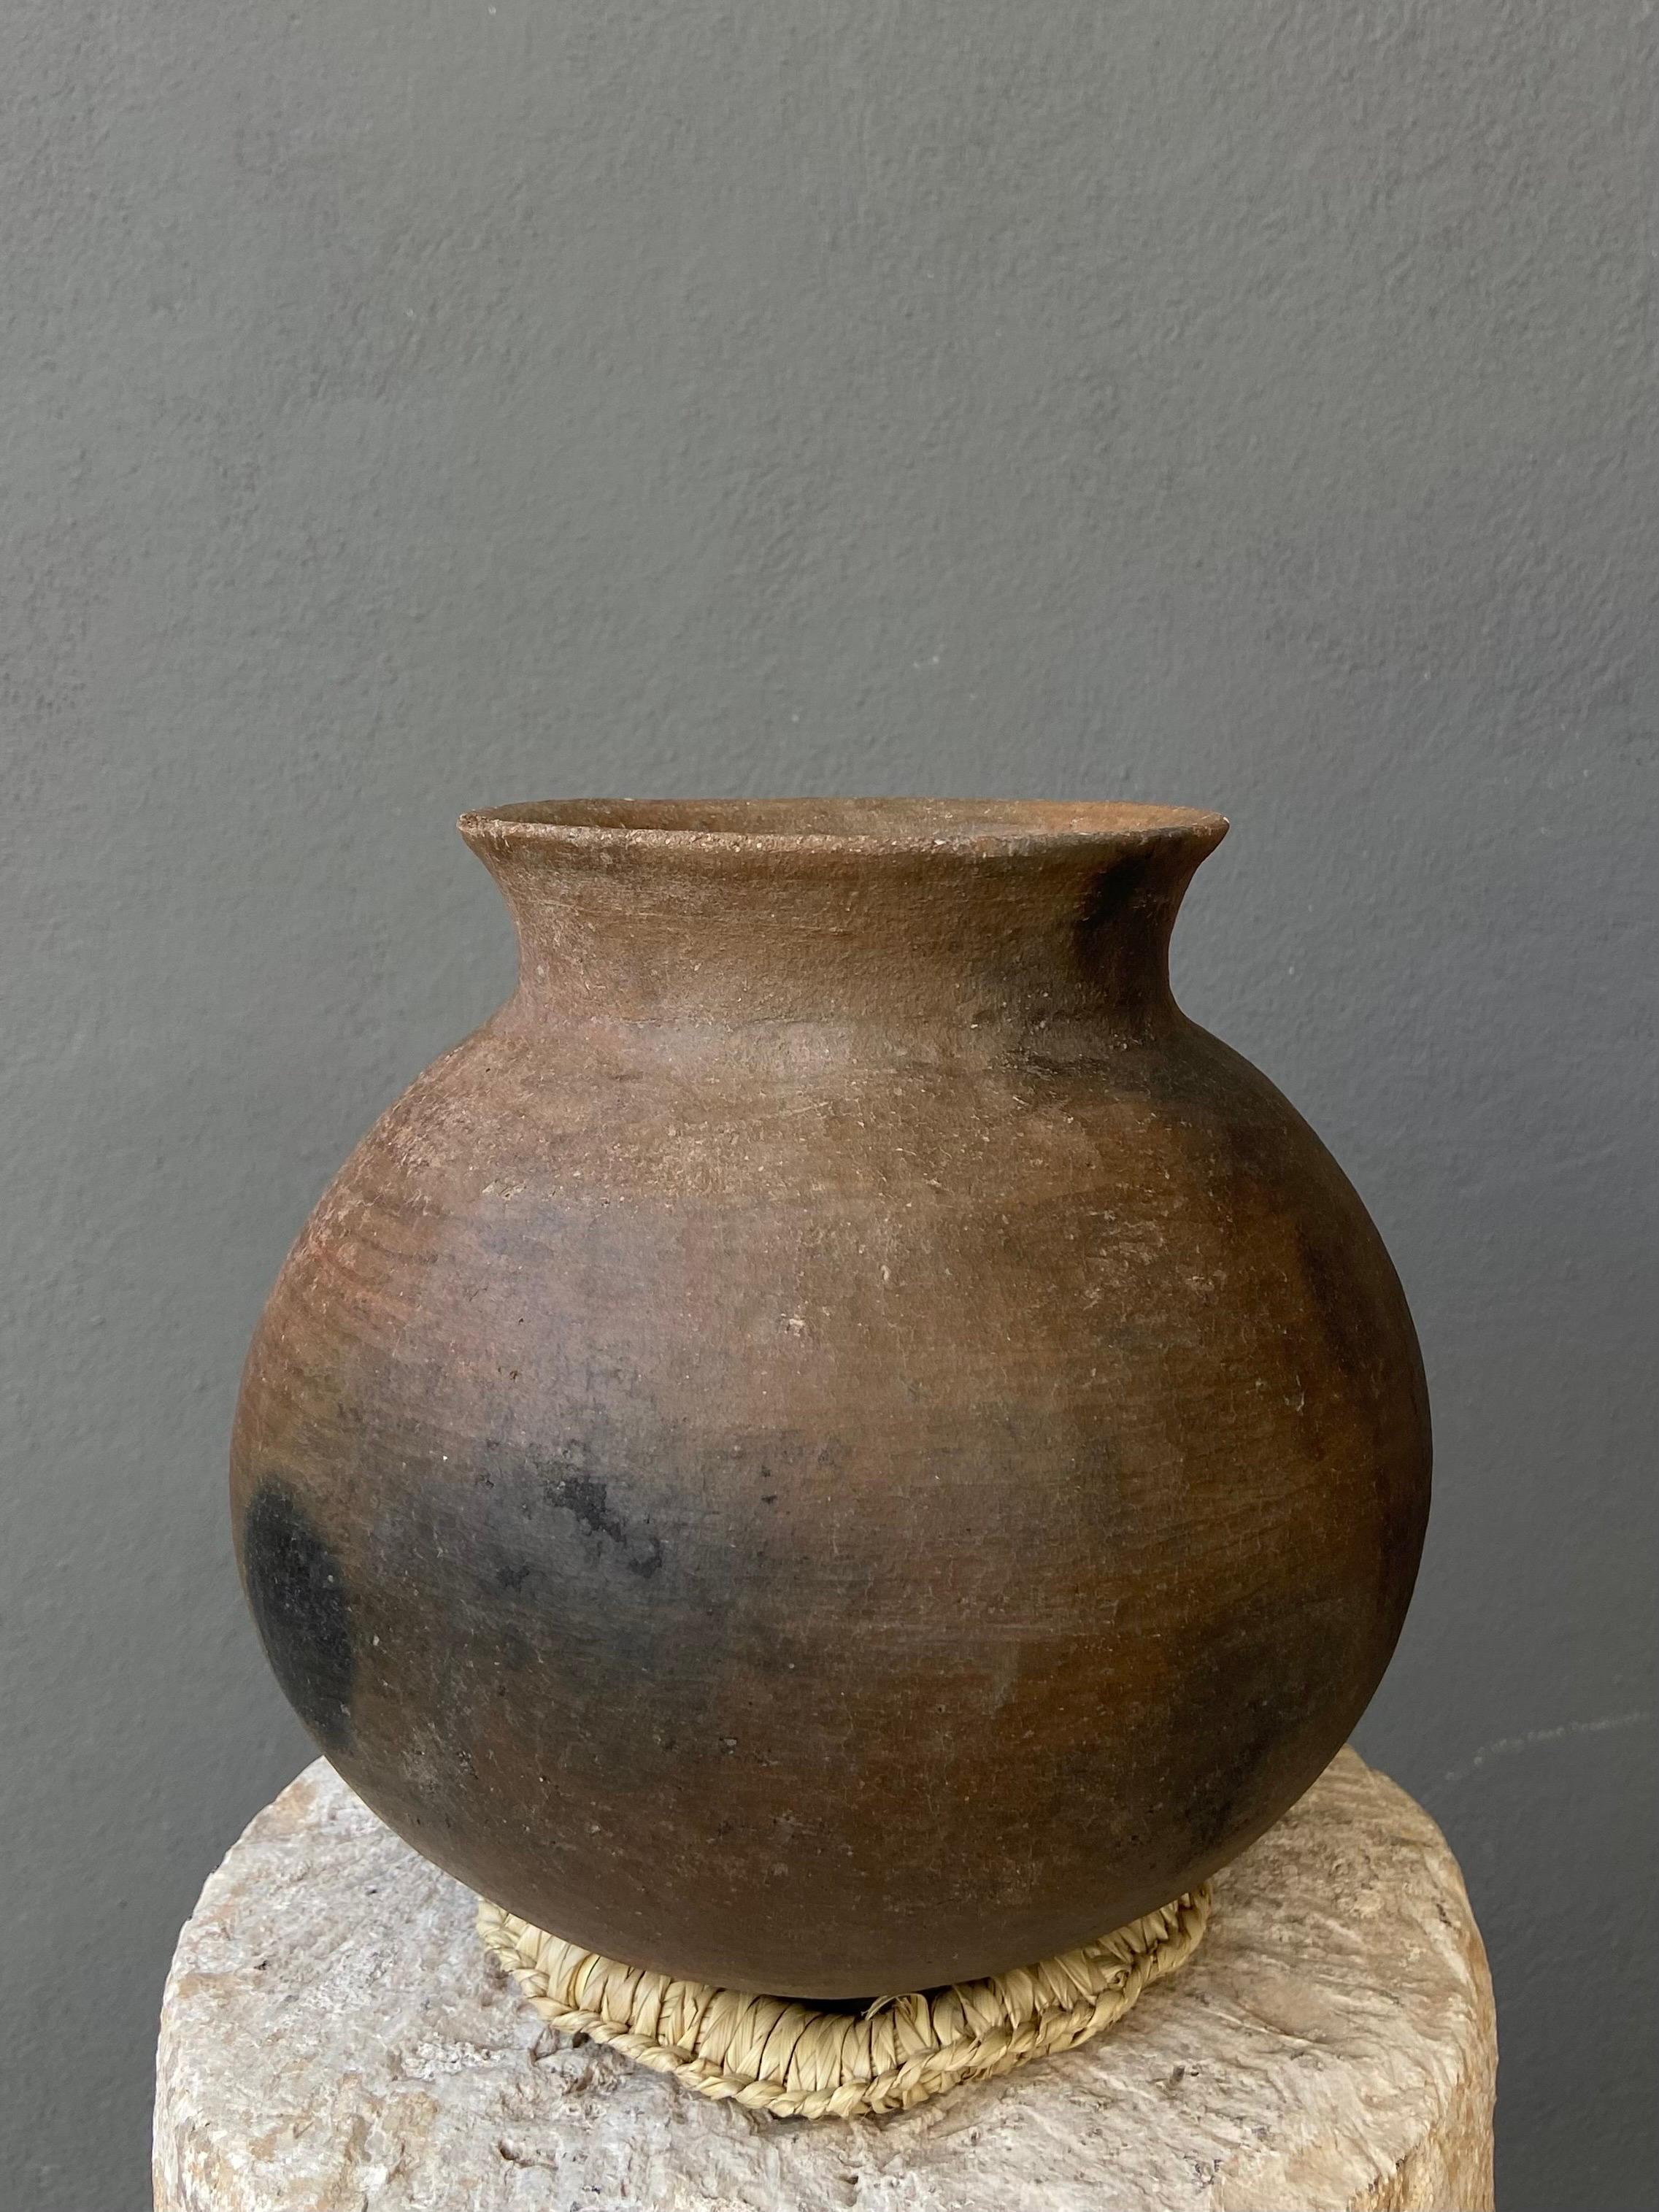 Late 20th Century Terracotta Cooking Pot From The Mixteca Region of Oaxaca, Mexico